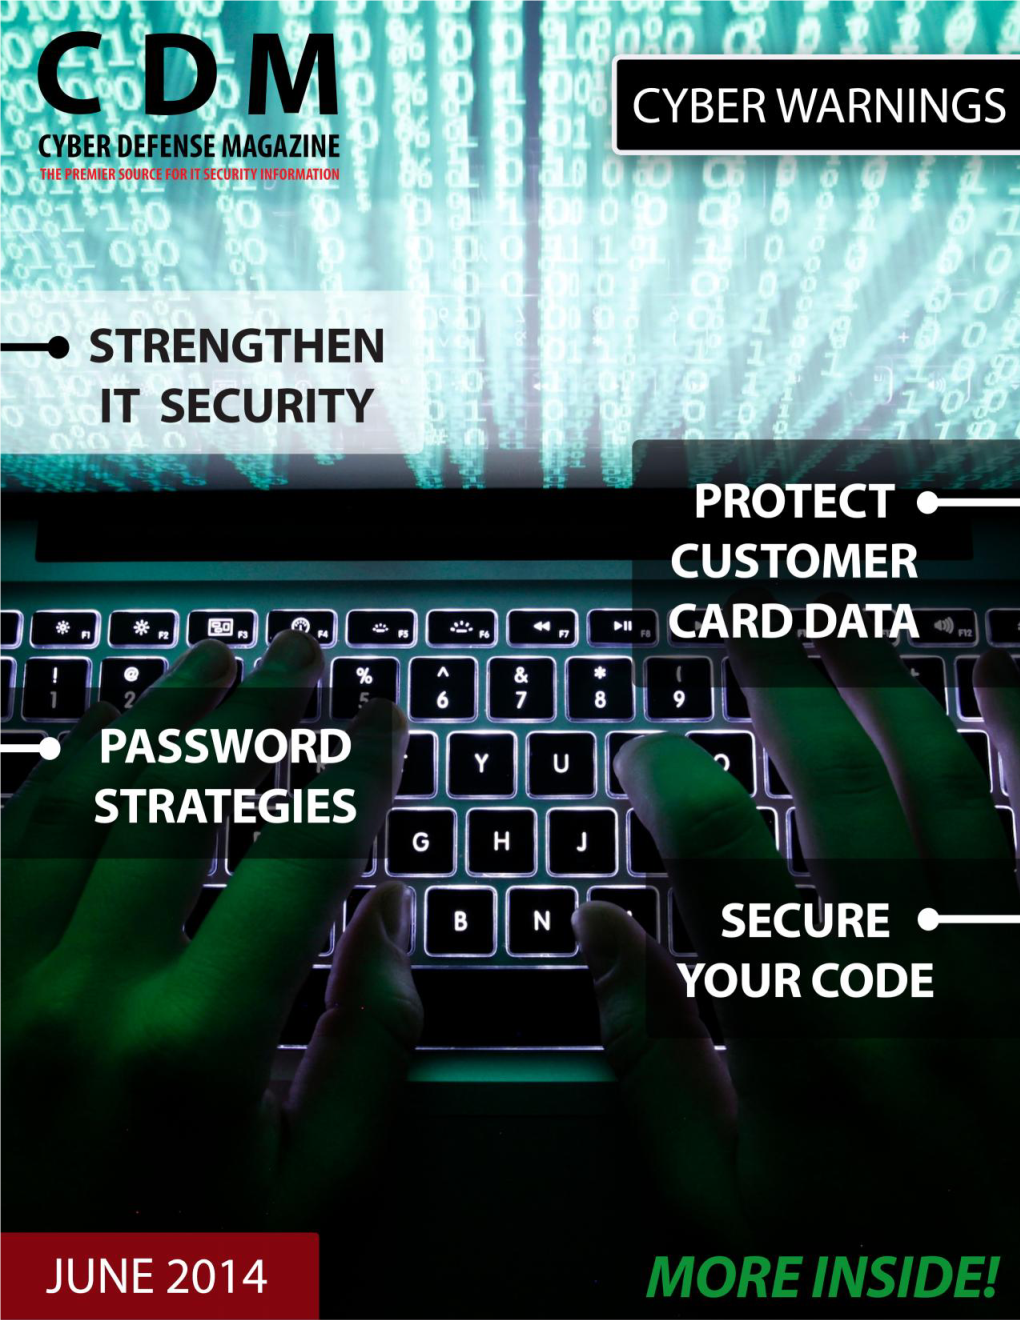 Cyber Warnings E-Magazine – January 2014 Edition Copyright © Cyber Defense Magazine, All Rights Reserved Worldwide CONTENTS CYBER WARNINGS